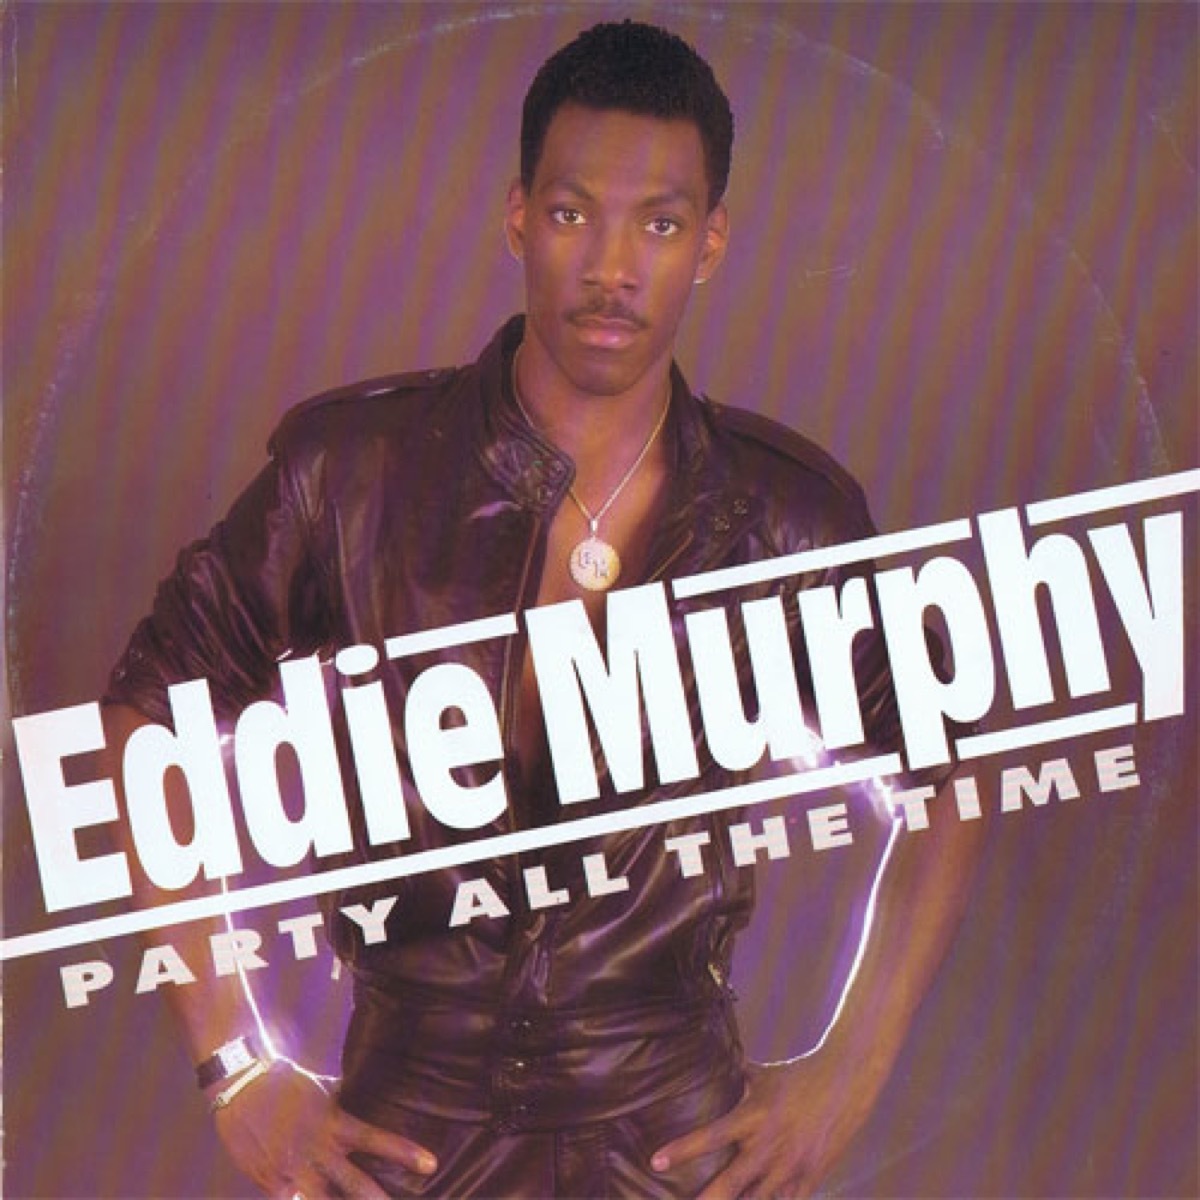 Eddie Murphy Party All The Time 1980s One-Hit Wonders